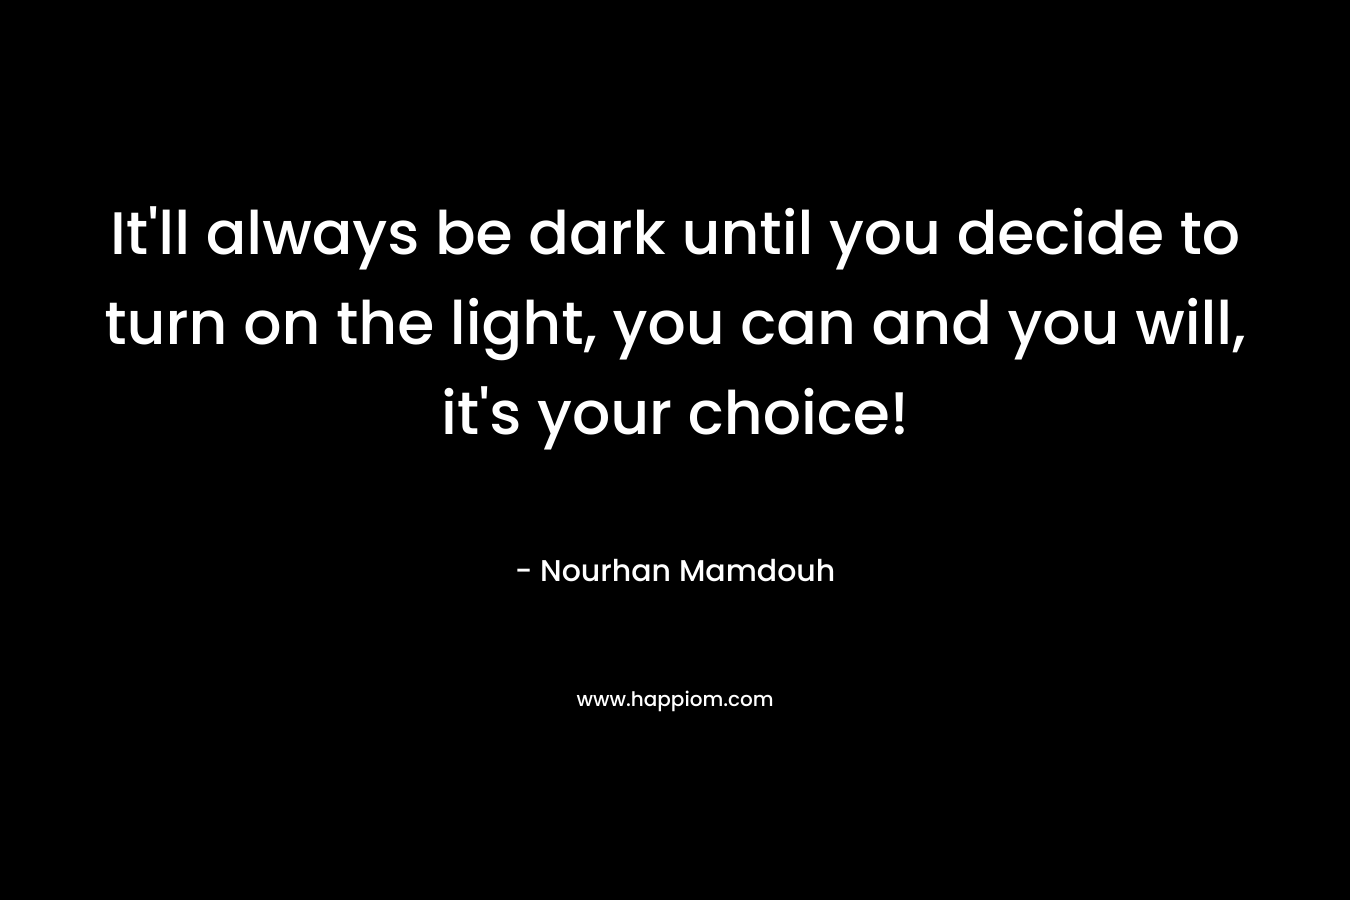 It’ll always be dark until you decide to turn on the light, you can and you will, it’s your choice! – Nourhan Mamdouh